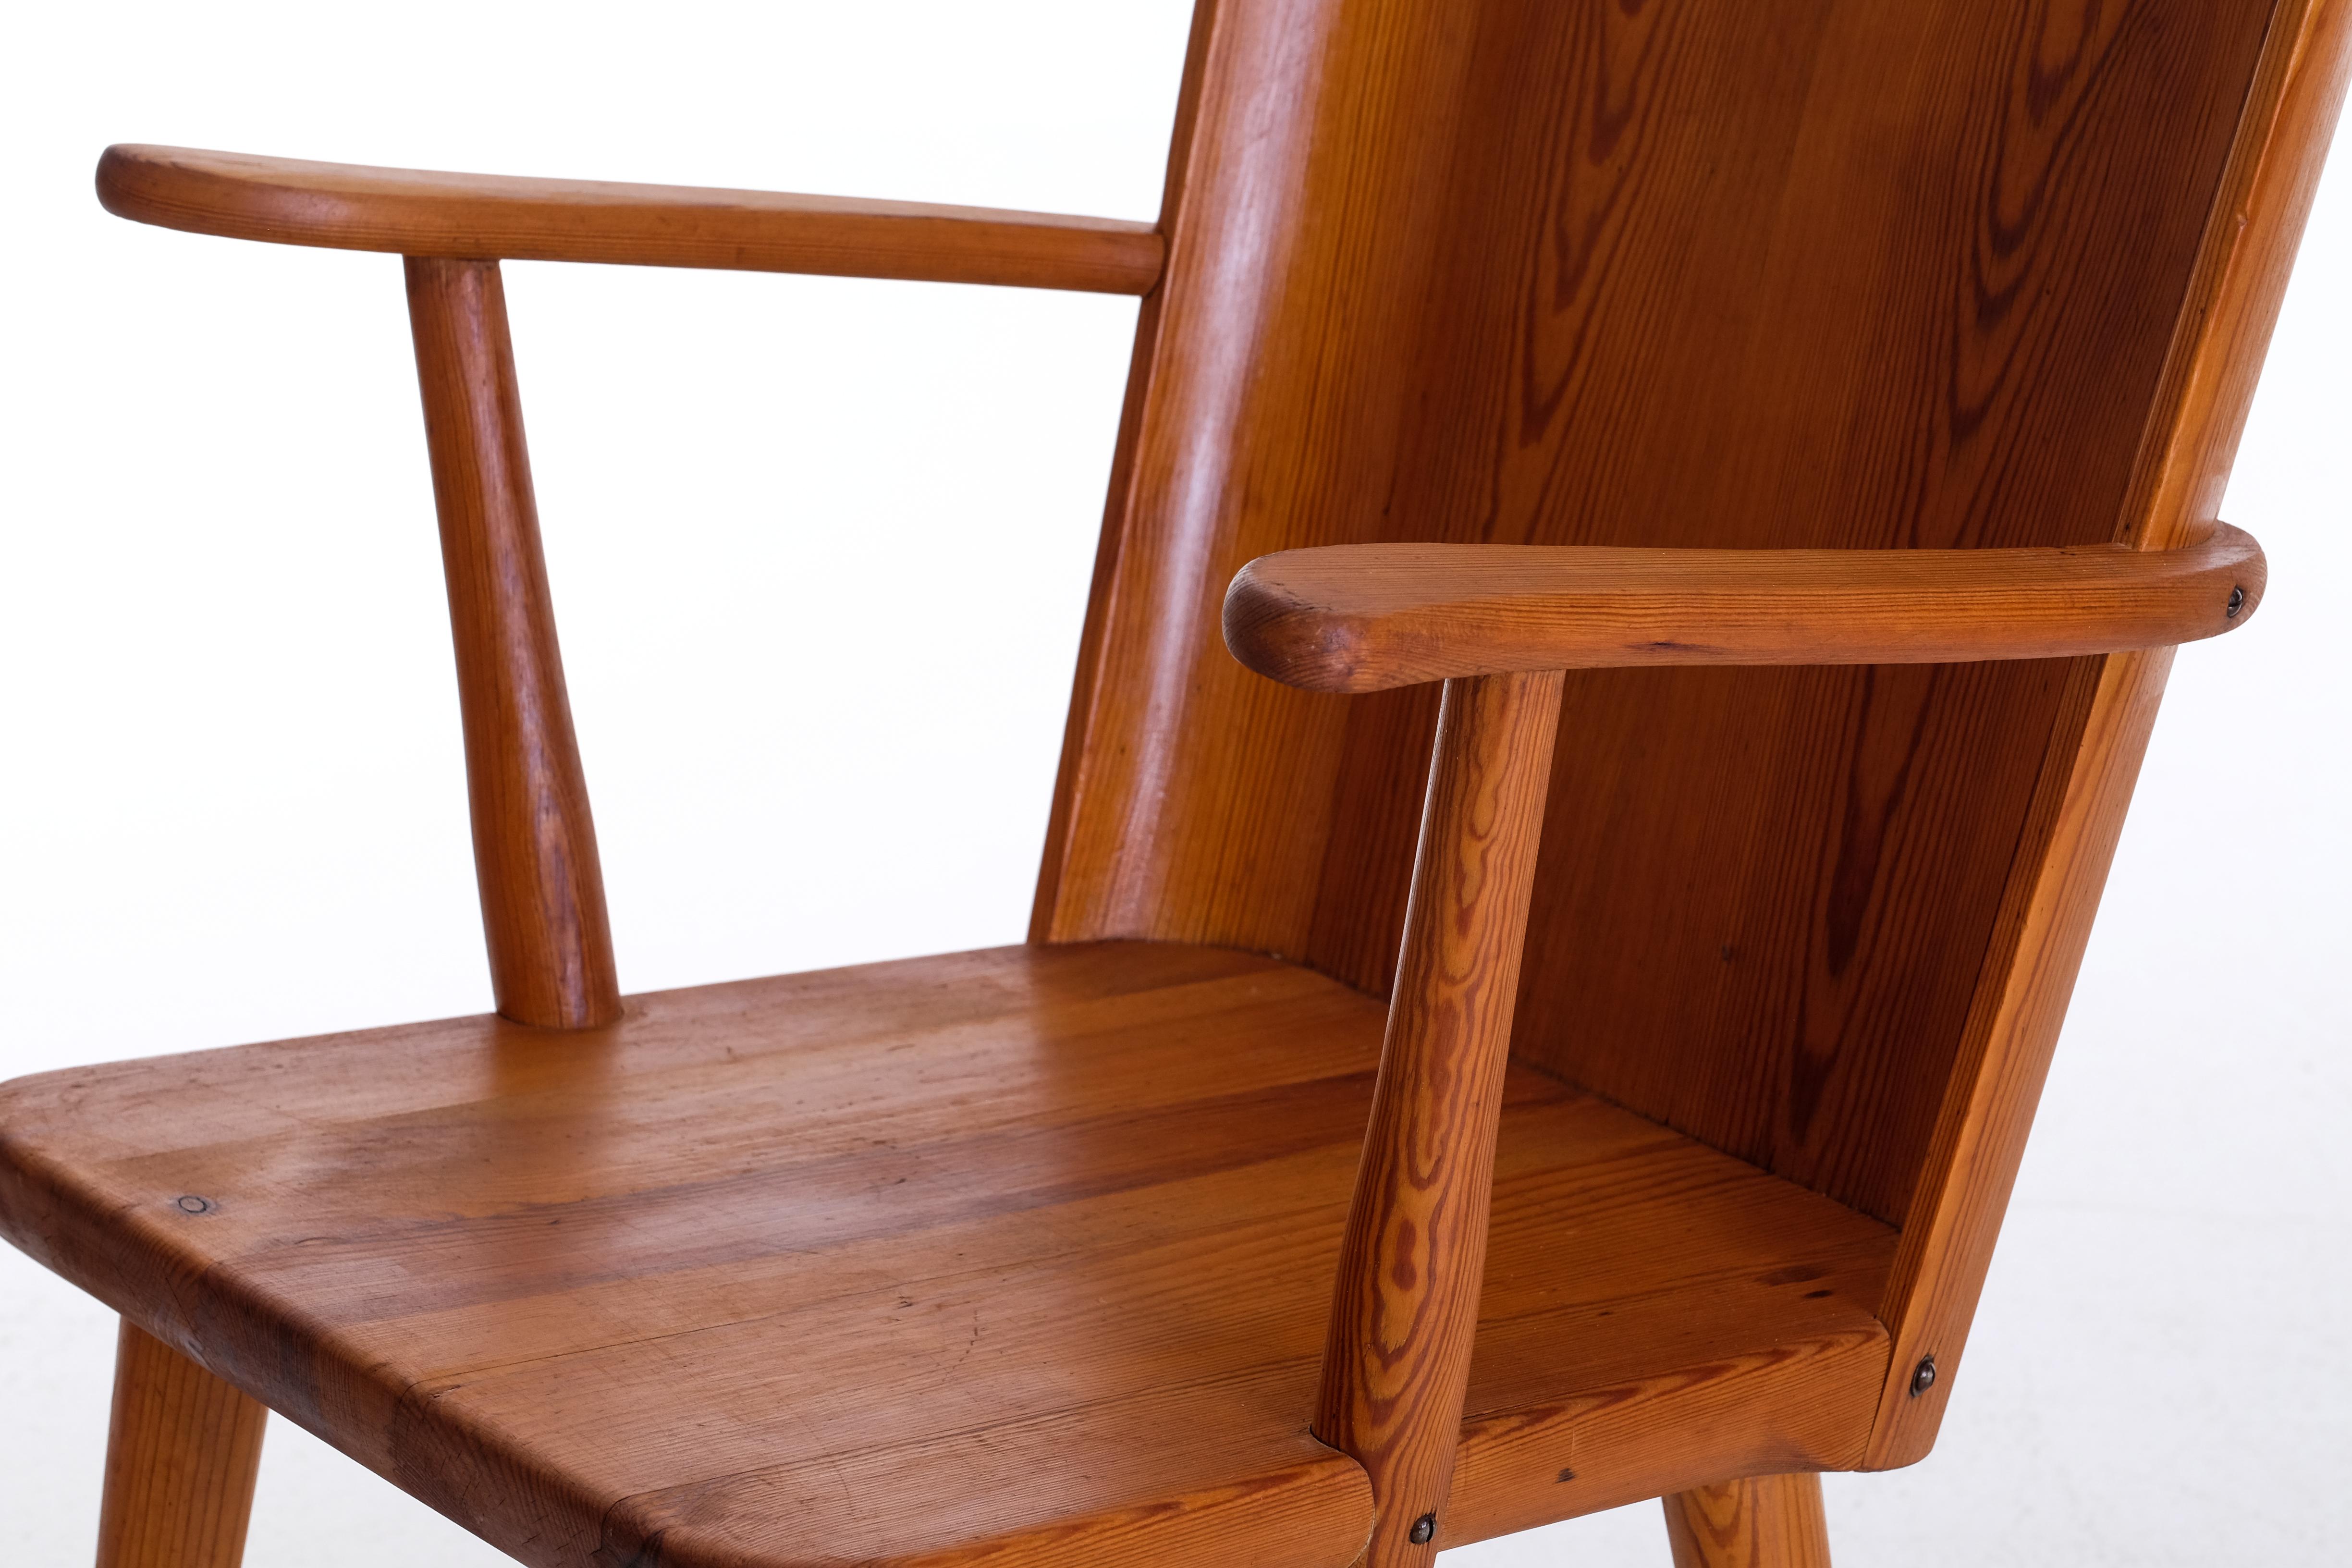 Pair of Swedish Pine Chairs by Göran Malmvall, 1950s For Sale 1